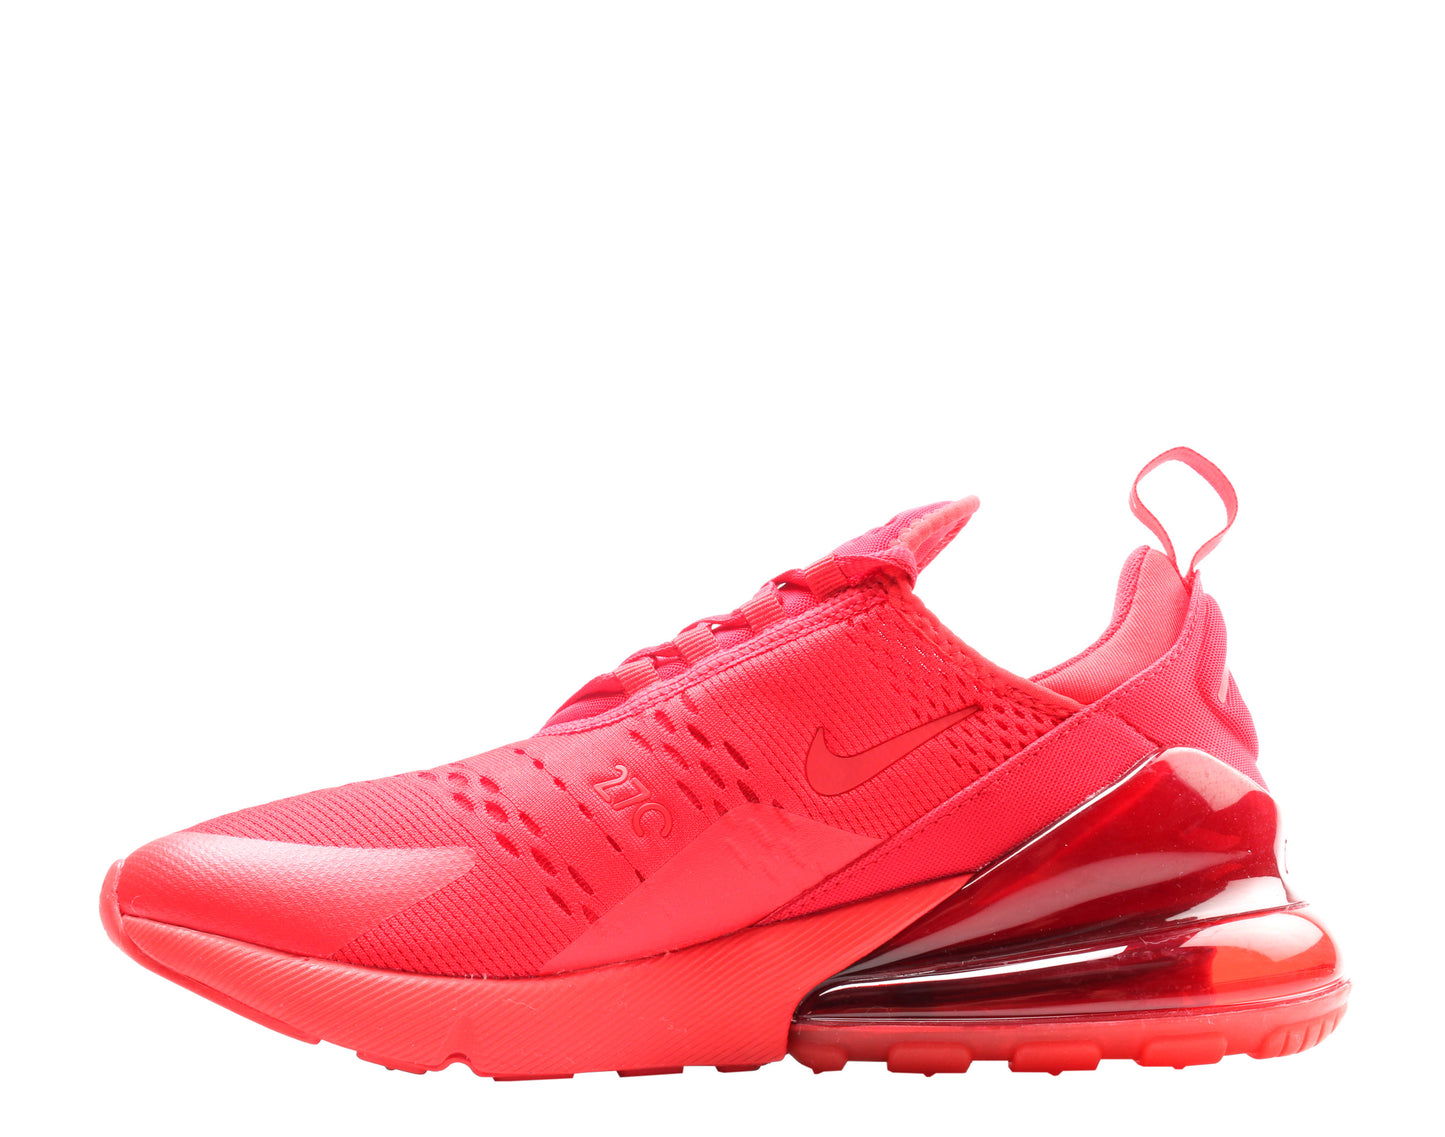 Nike Air Max 270 Triple Red/University Red Men's Lifestyle Shoes CV7544-600